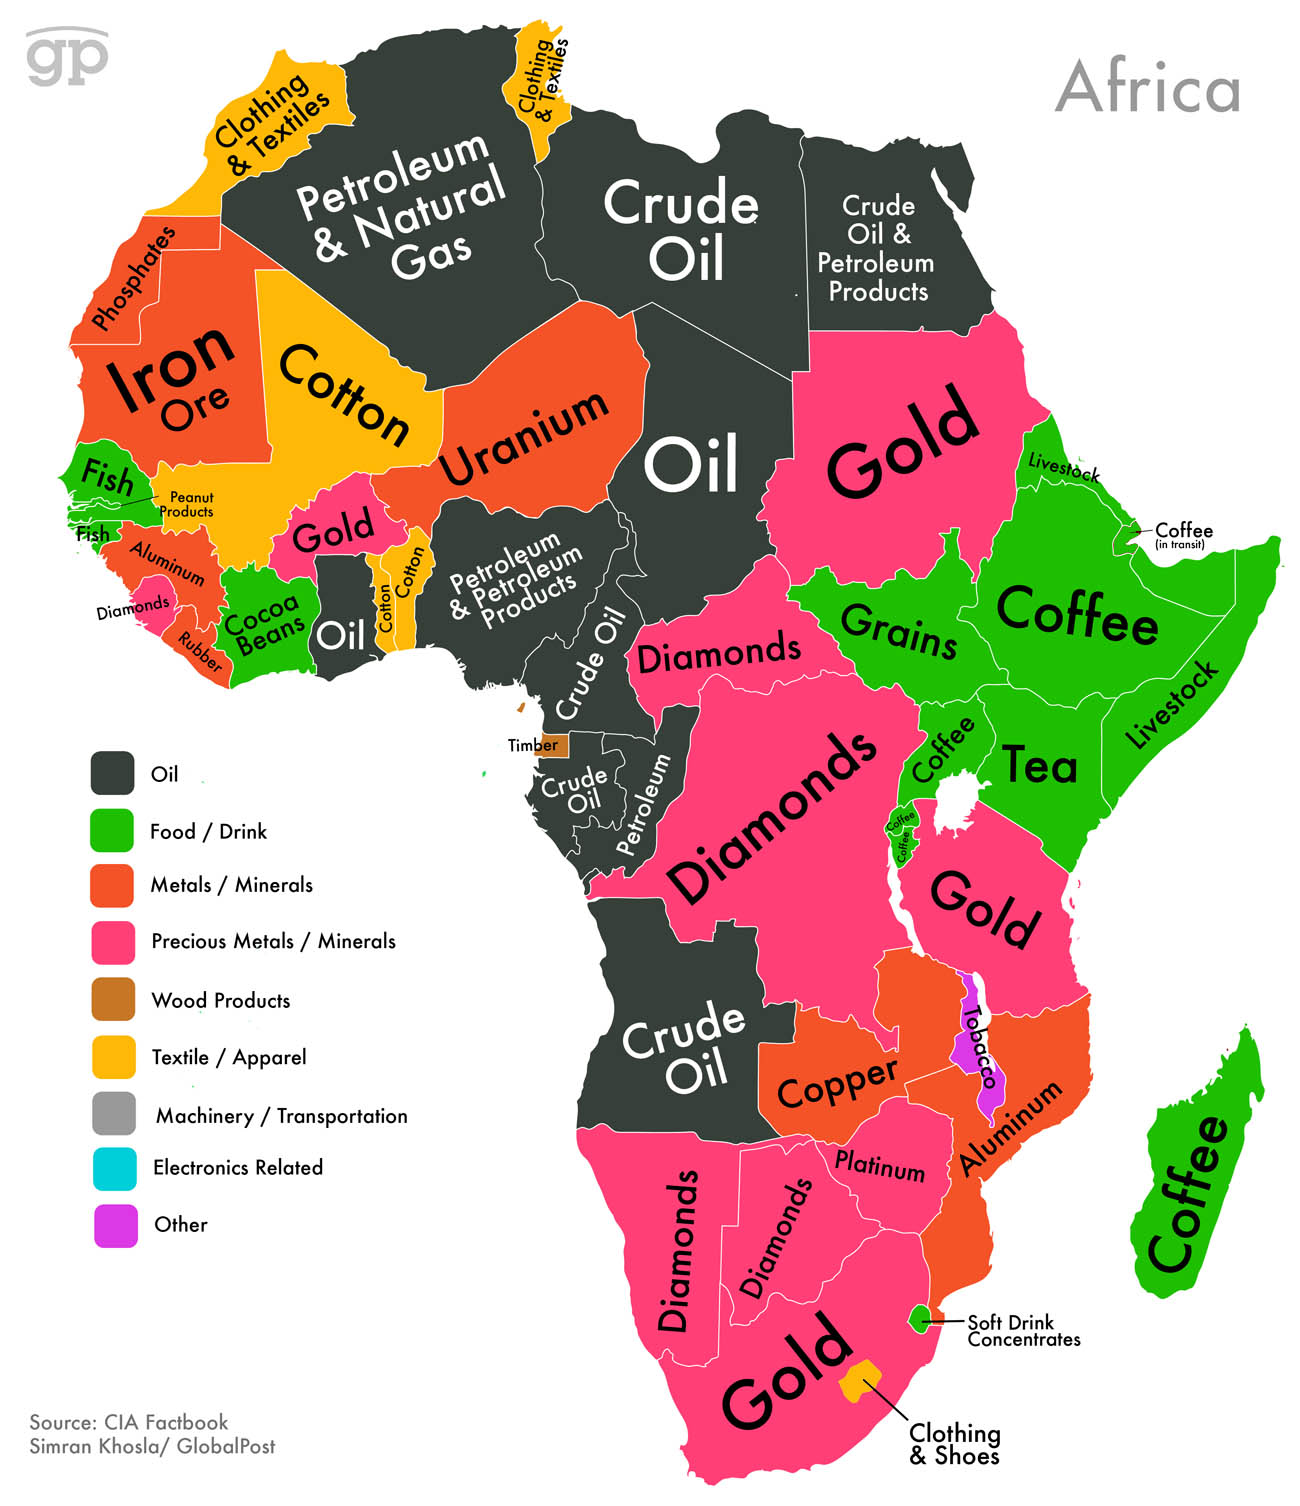 richest continent in the world - gp Clothing & Textiles Africa Clothing & Textiles Petroleum & Natural Phosphates Crude Oil Gas Crude Oil & Petroleum Products Cotton Iron Ore Fish Livestock Uranium Gold Peanut Products Coffee Aluminum Gold in transit Cott